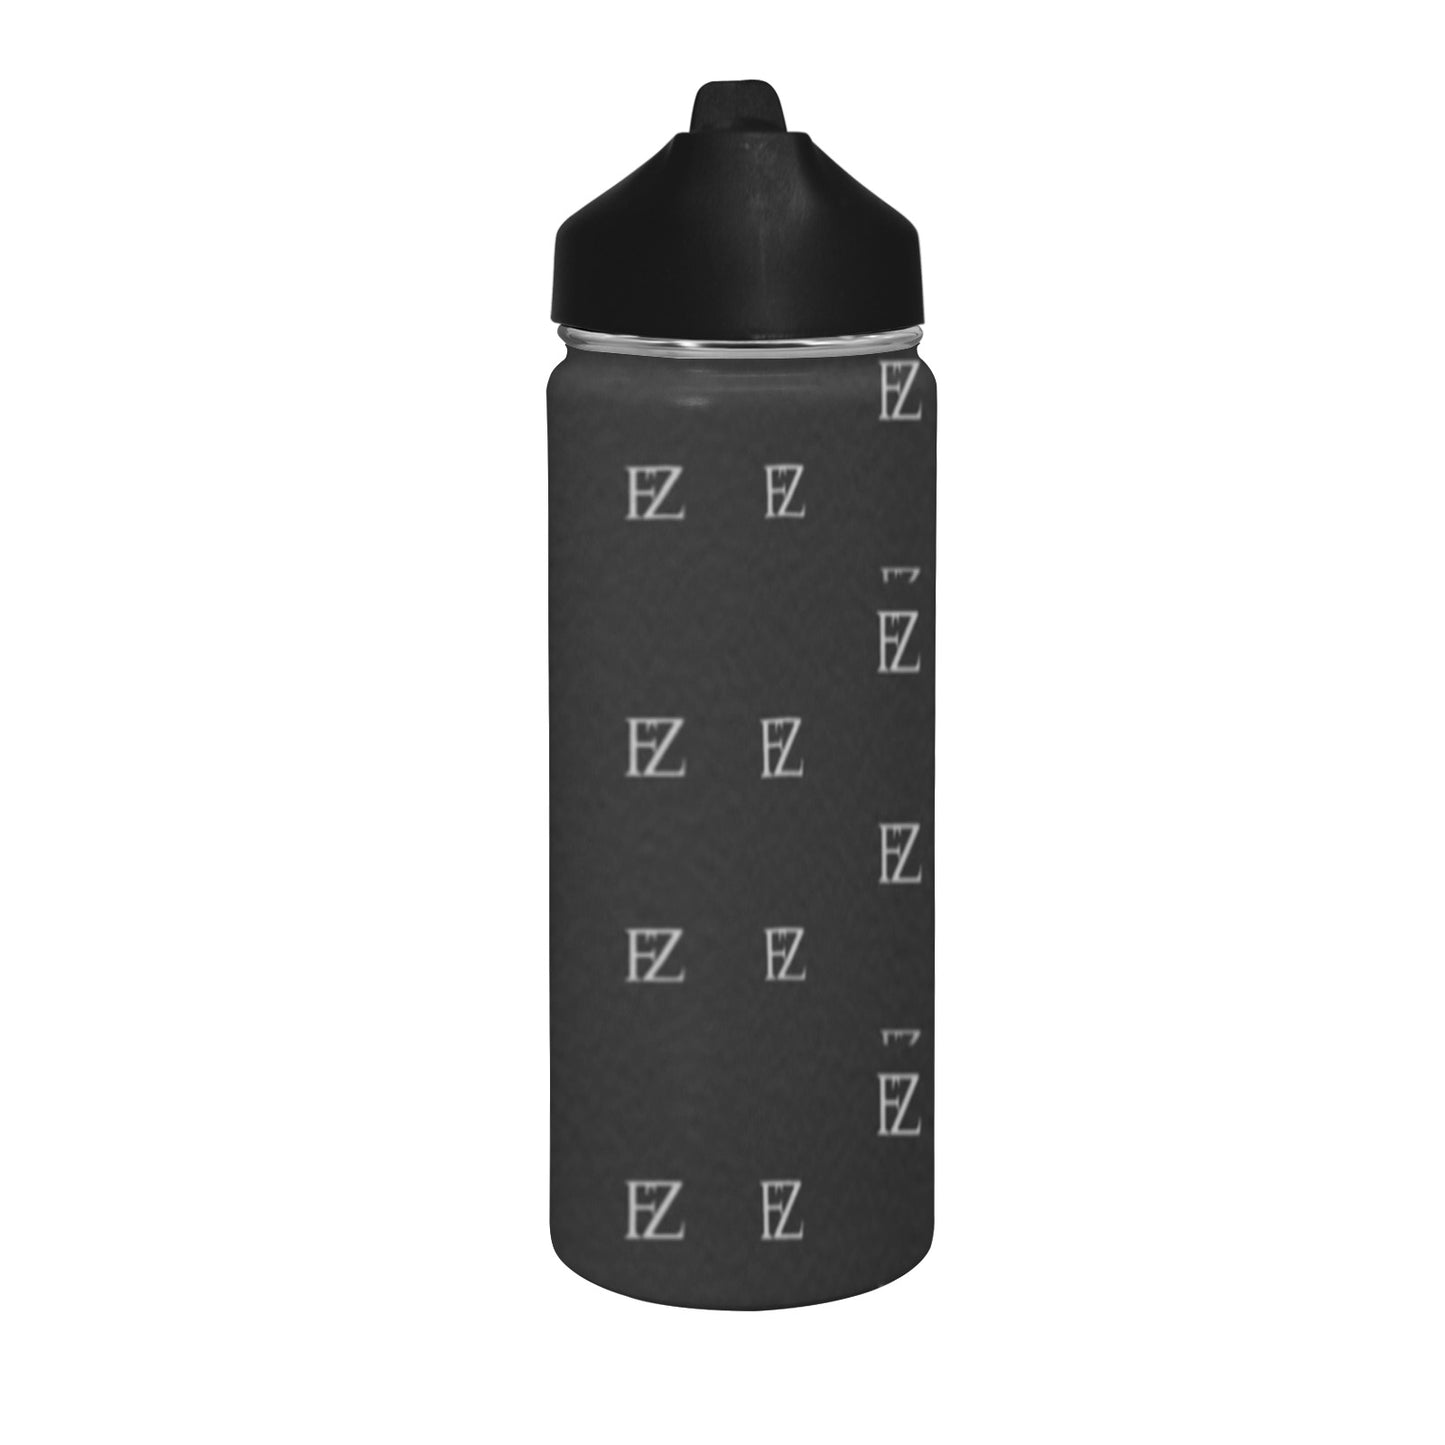 FZ Original Insulated With Straw Lid water bottle